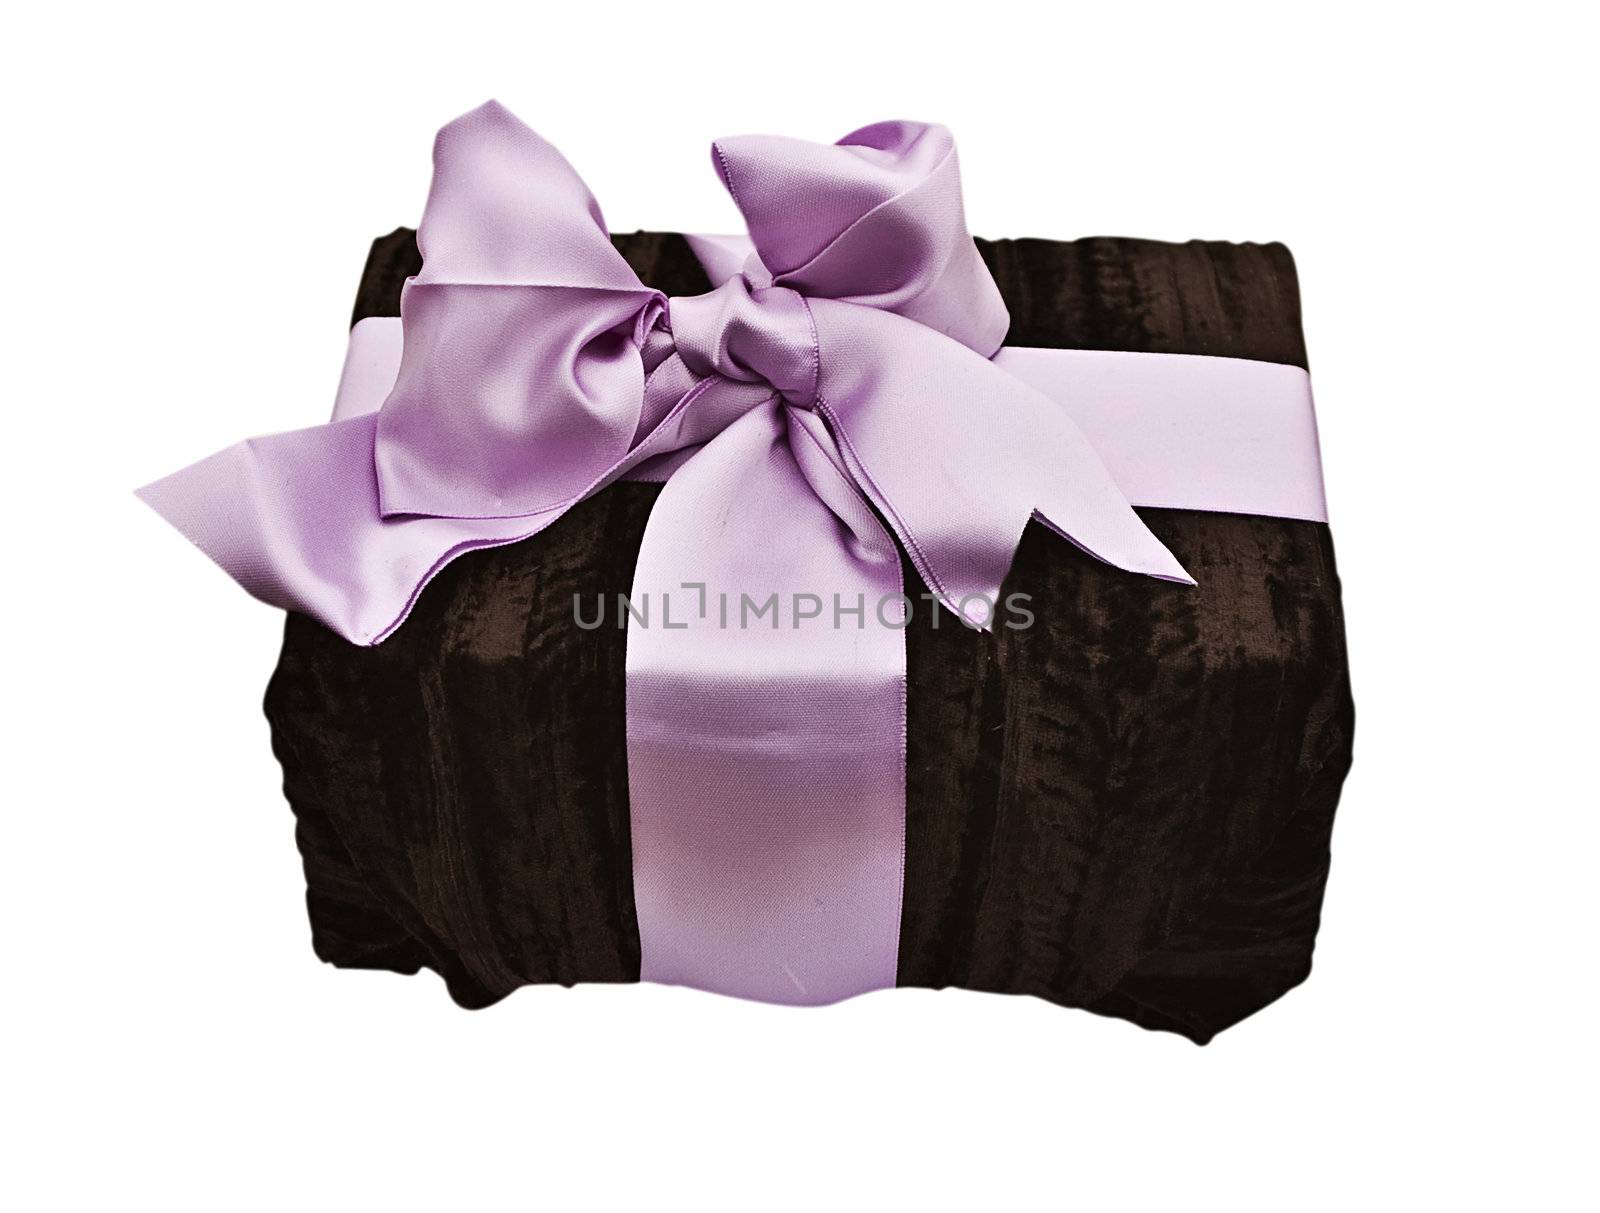 A present wrapped with soft brown material and a satin bow